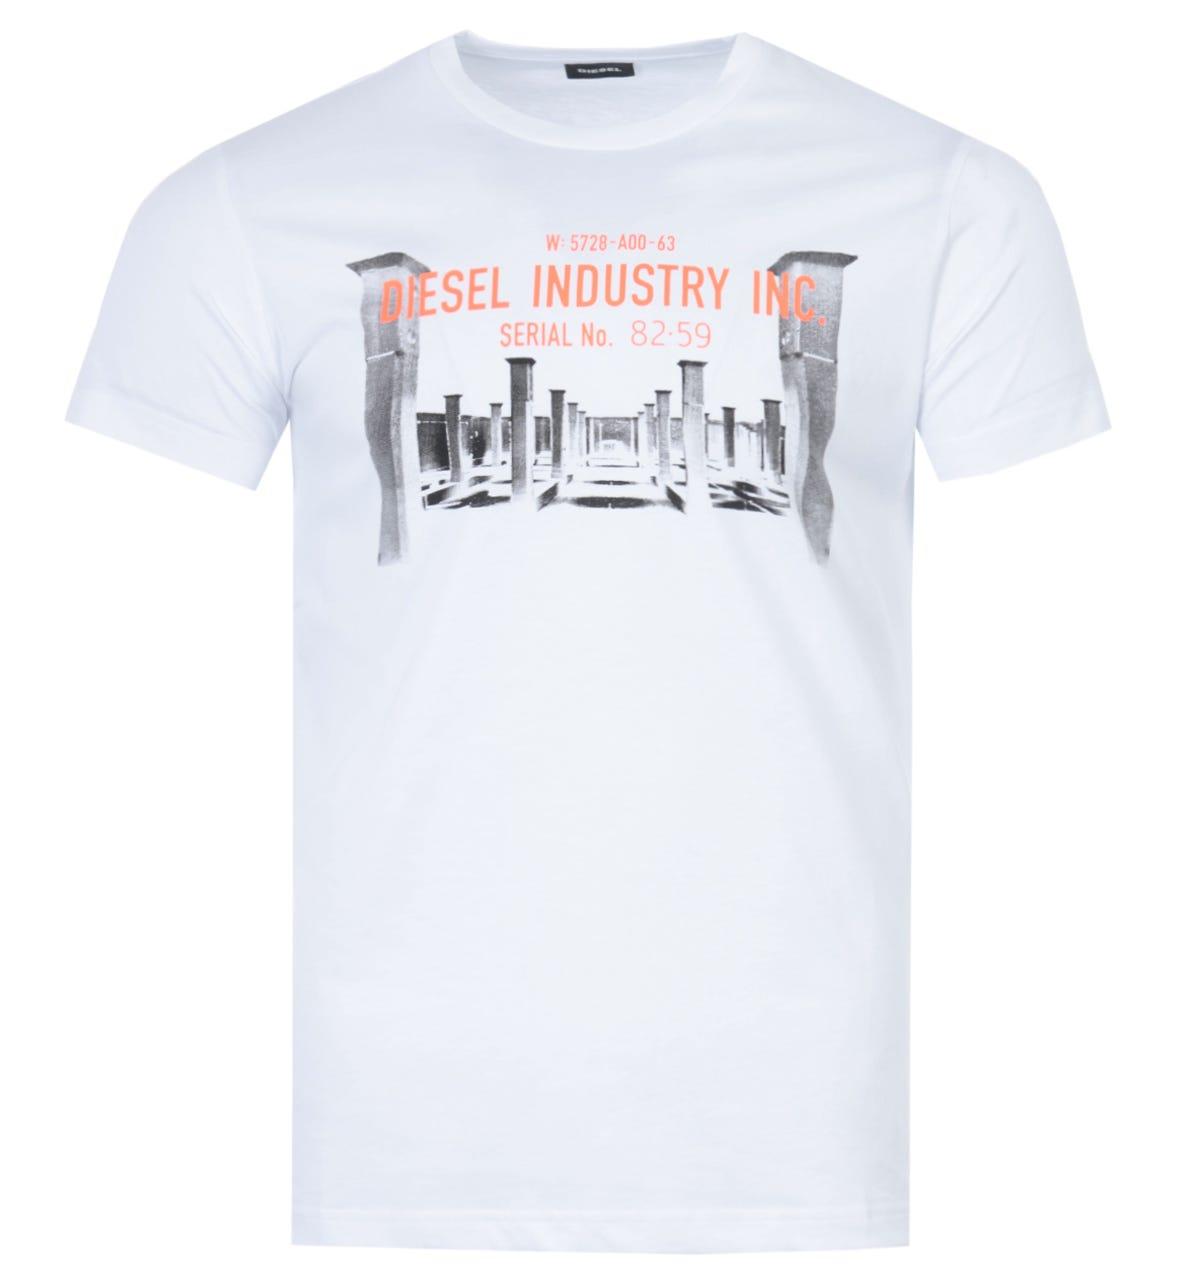 DIESEL Cotton T-diego Industry Inc Print T-shirt in White for Men - Lyst